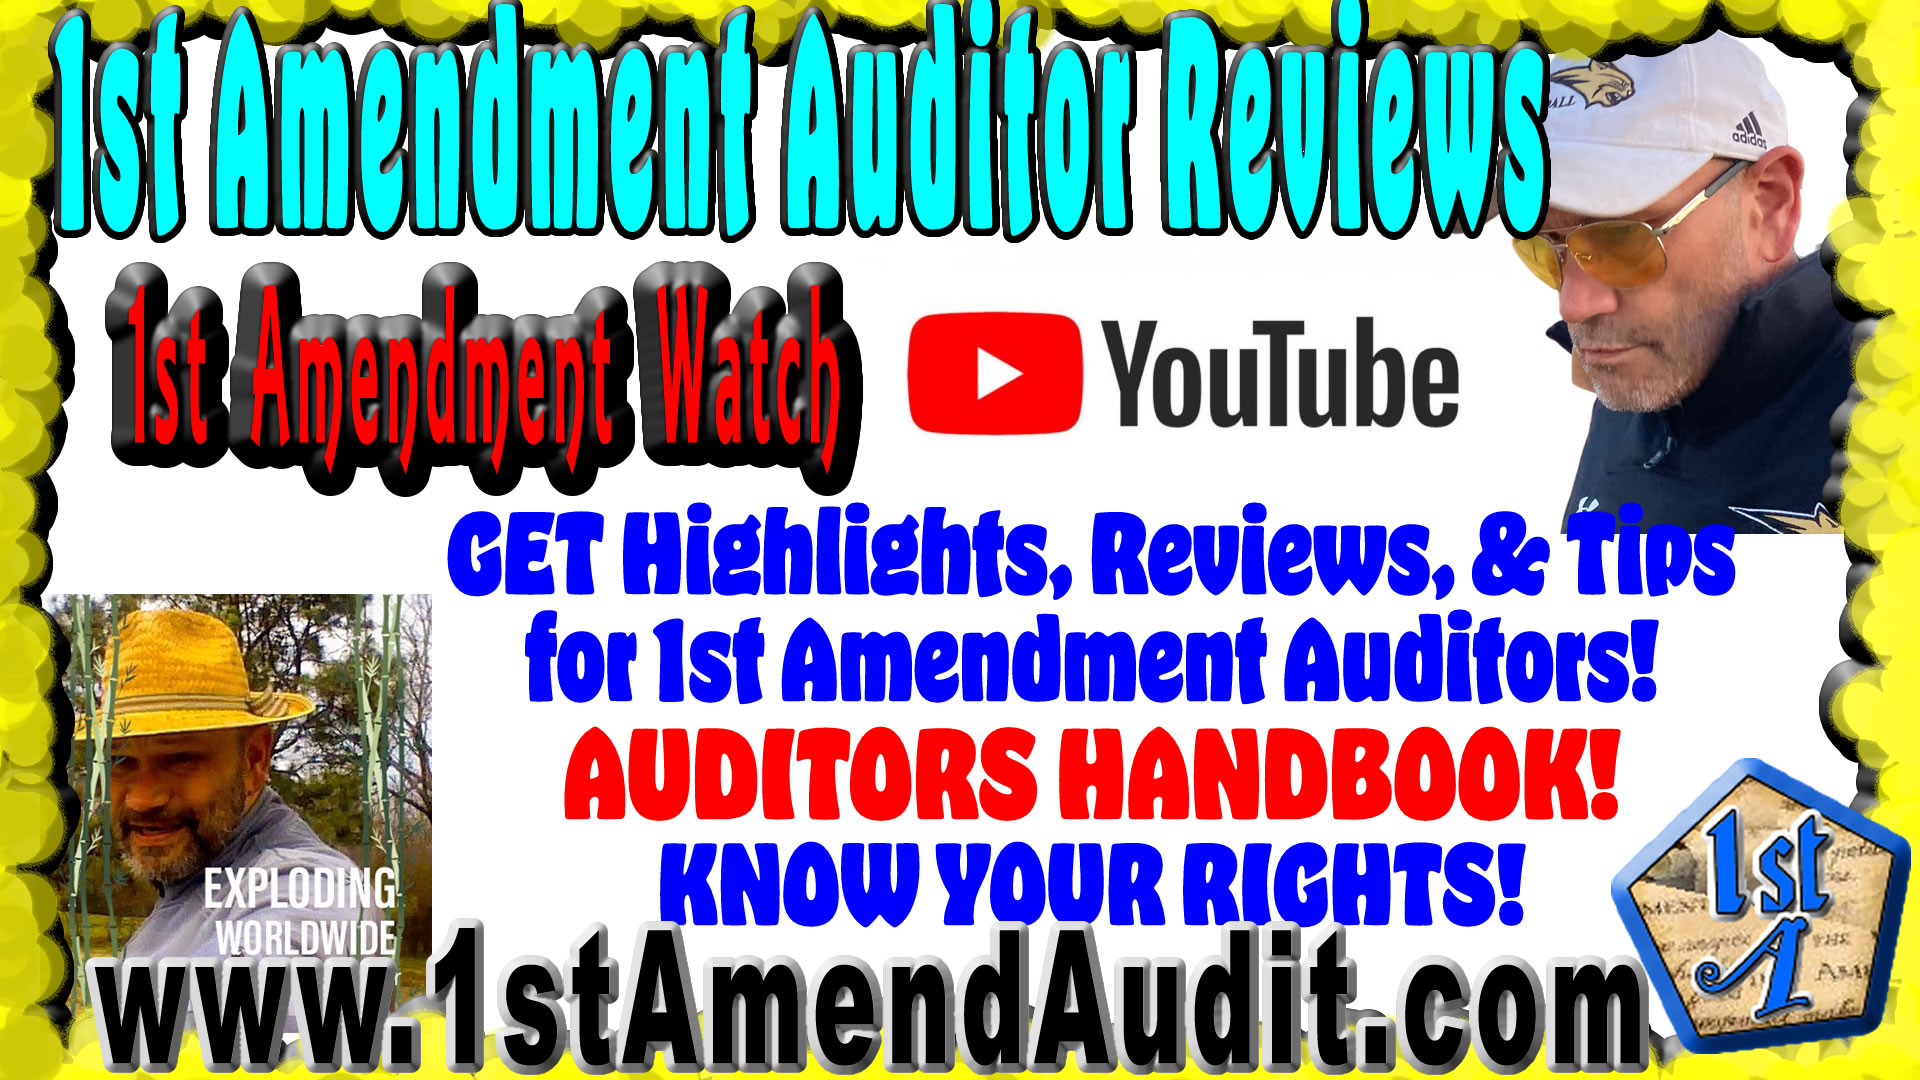 First Amendment Auditor Review News and More on 1st Amend Audit dot com